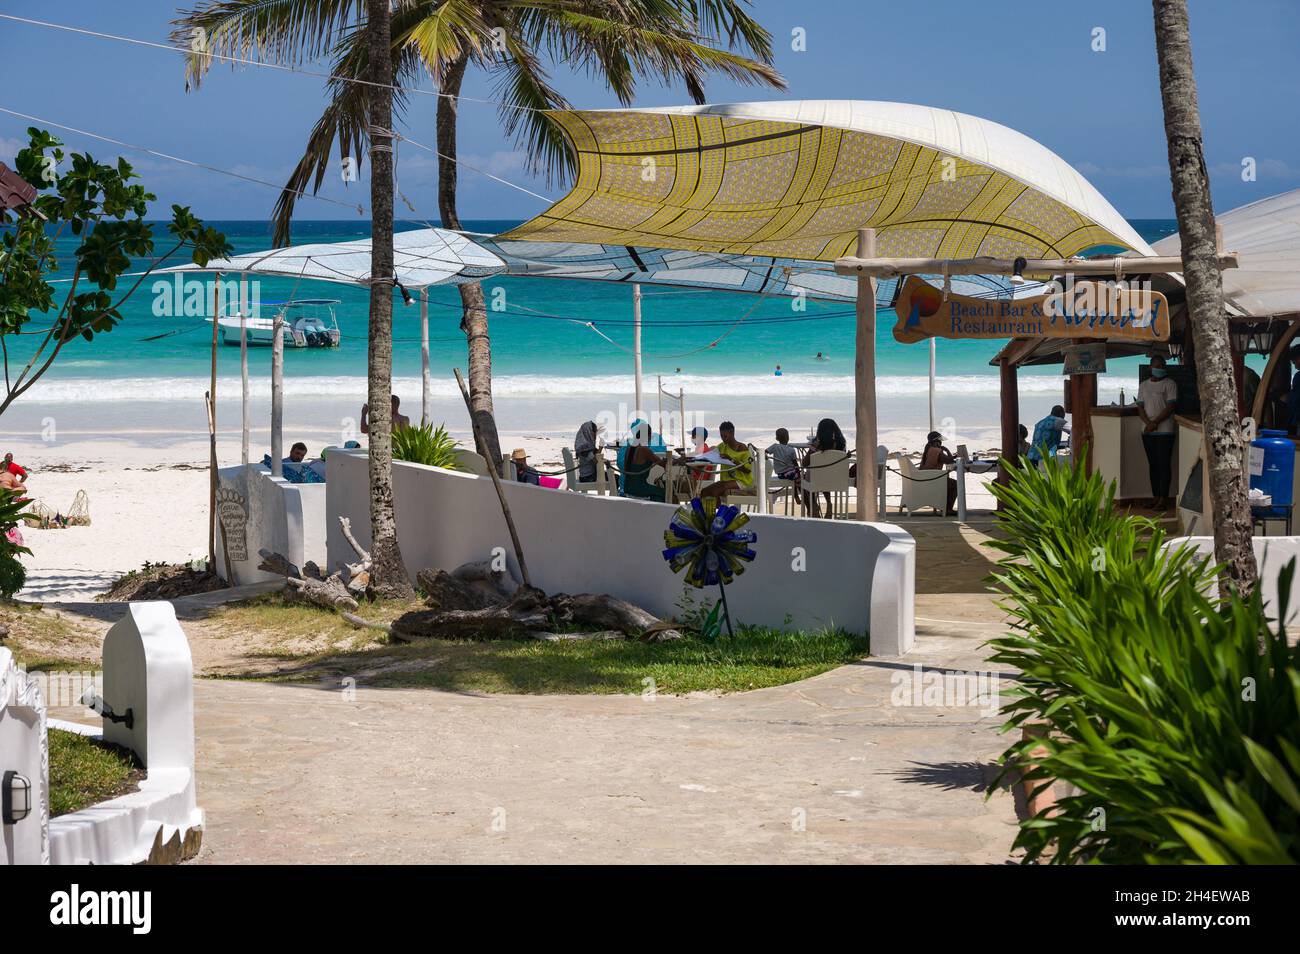 Exterior of Nomads beach restaurant with white sand beach in foreground, Diani, Kenya Stock Photo